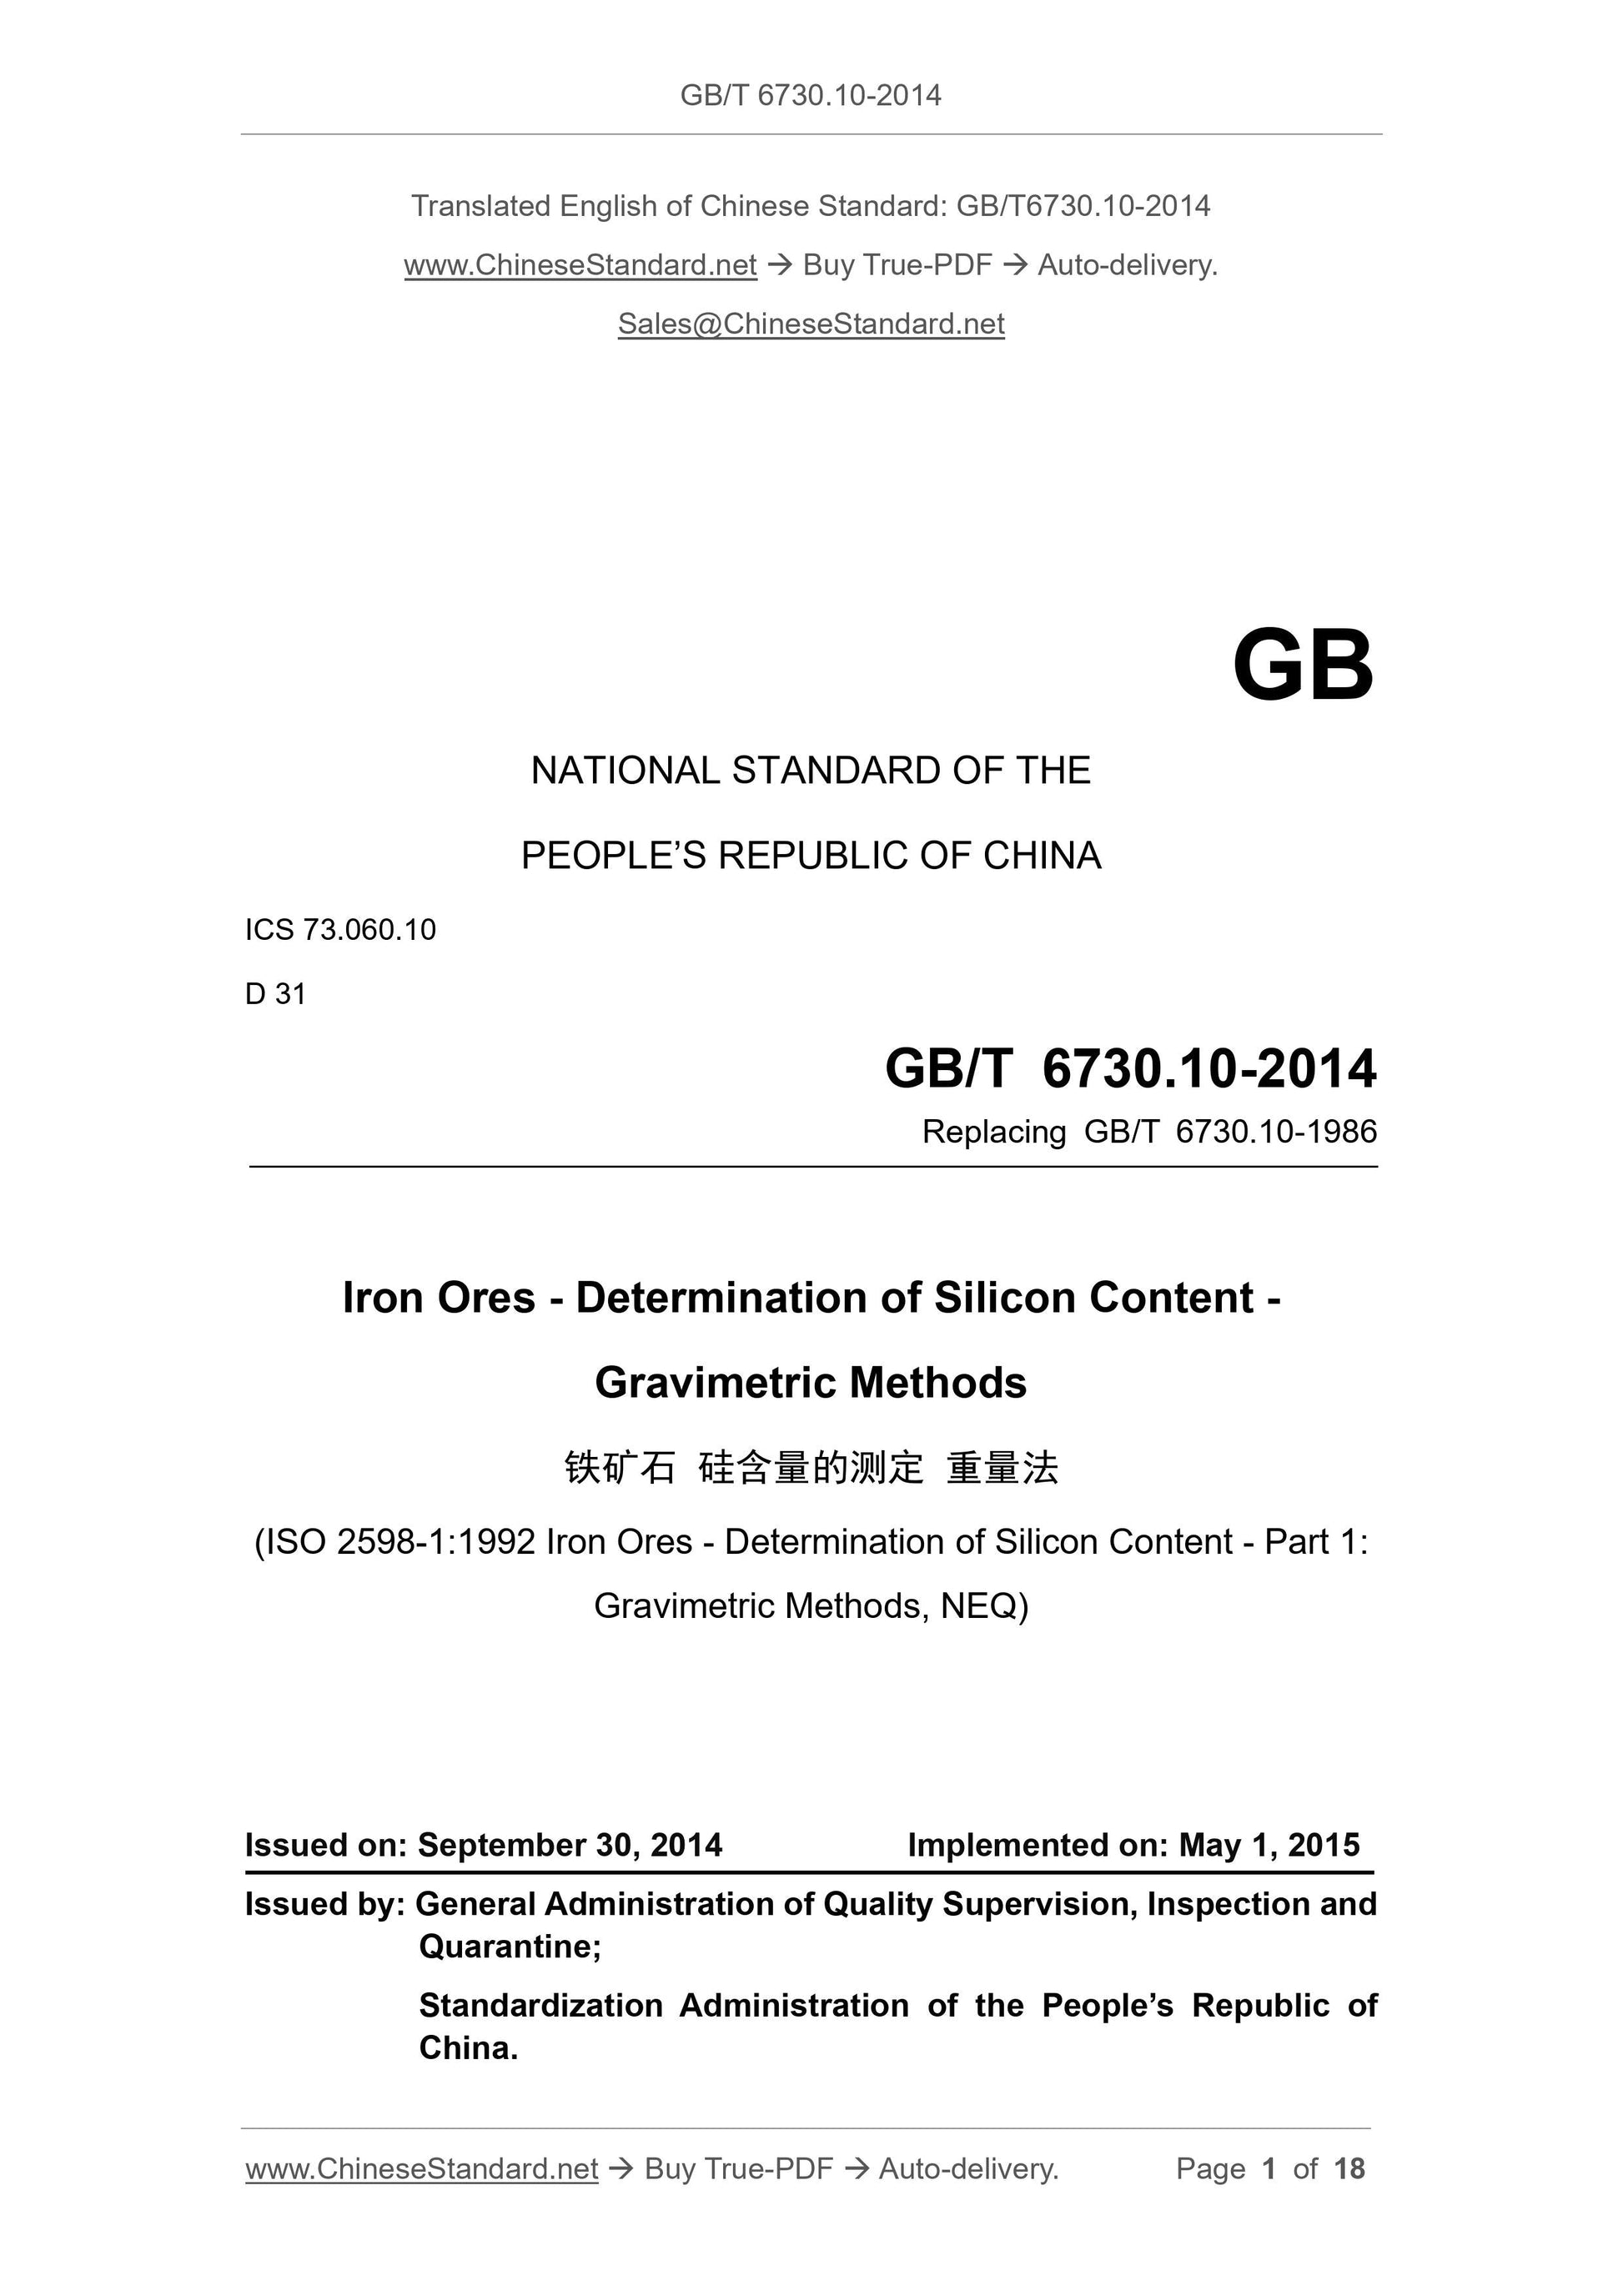 GB/T 6730.10-2014 Page 1